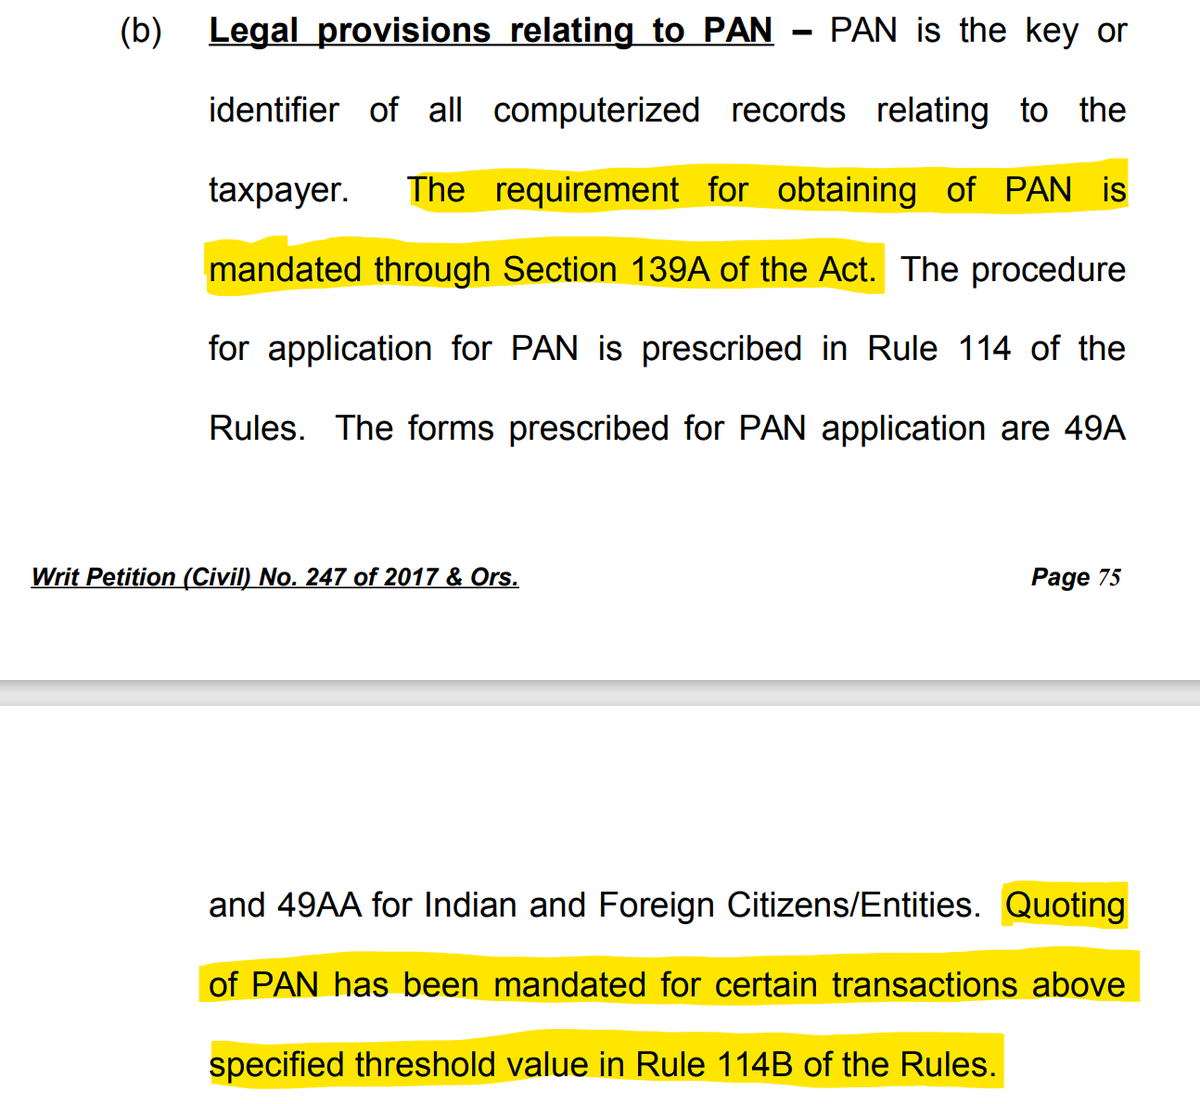 Quoting of  #PAN has been mandated for certain transactions above specified threshold value in Rule 114B of the Rules (Binoy Viswam v UoI and Ors 2017: p 75, para 58[b])  https://www.uidai.gov.in/images/Pan-Aadhaar_Linking.pdf |  @AnupamSaraph  @sanjana_krishn